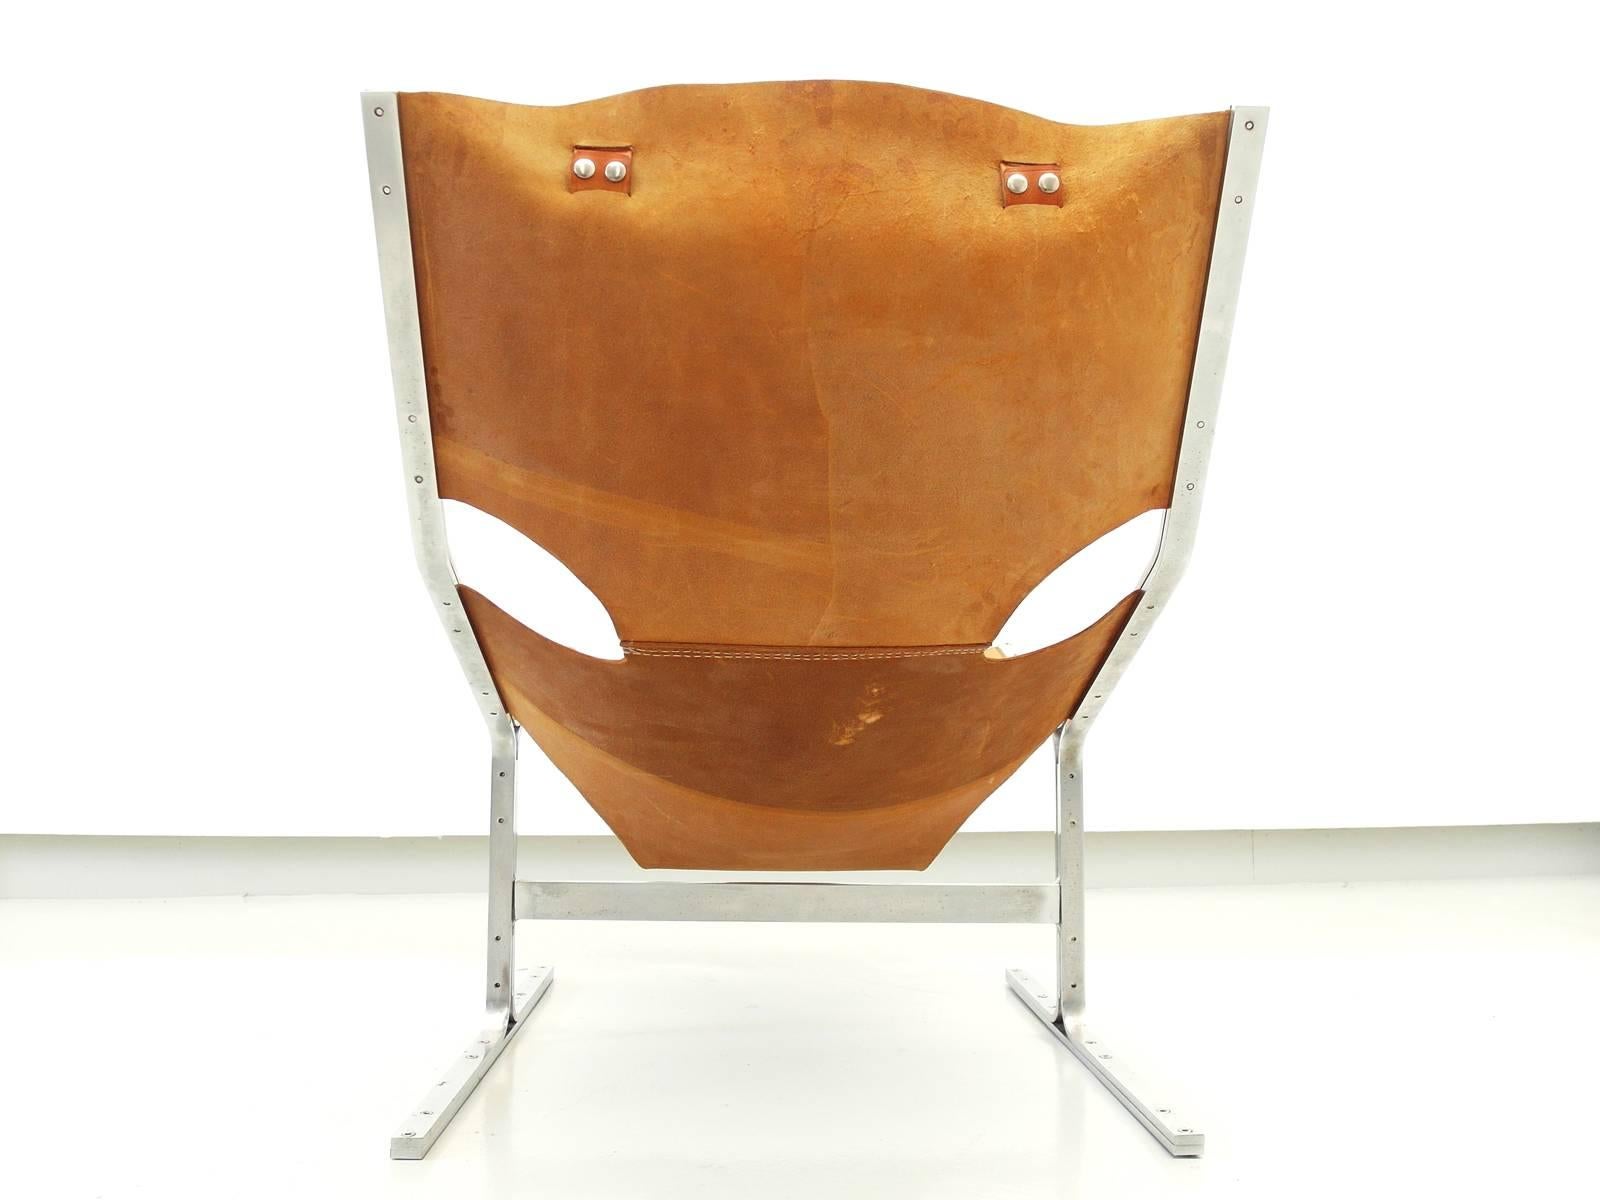 Mid-20th Century Leather and Brushed Steel Lounge Chair by Polak, Netherlands, circa 1958